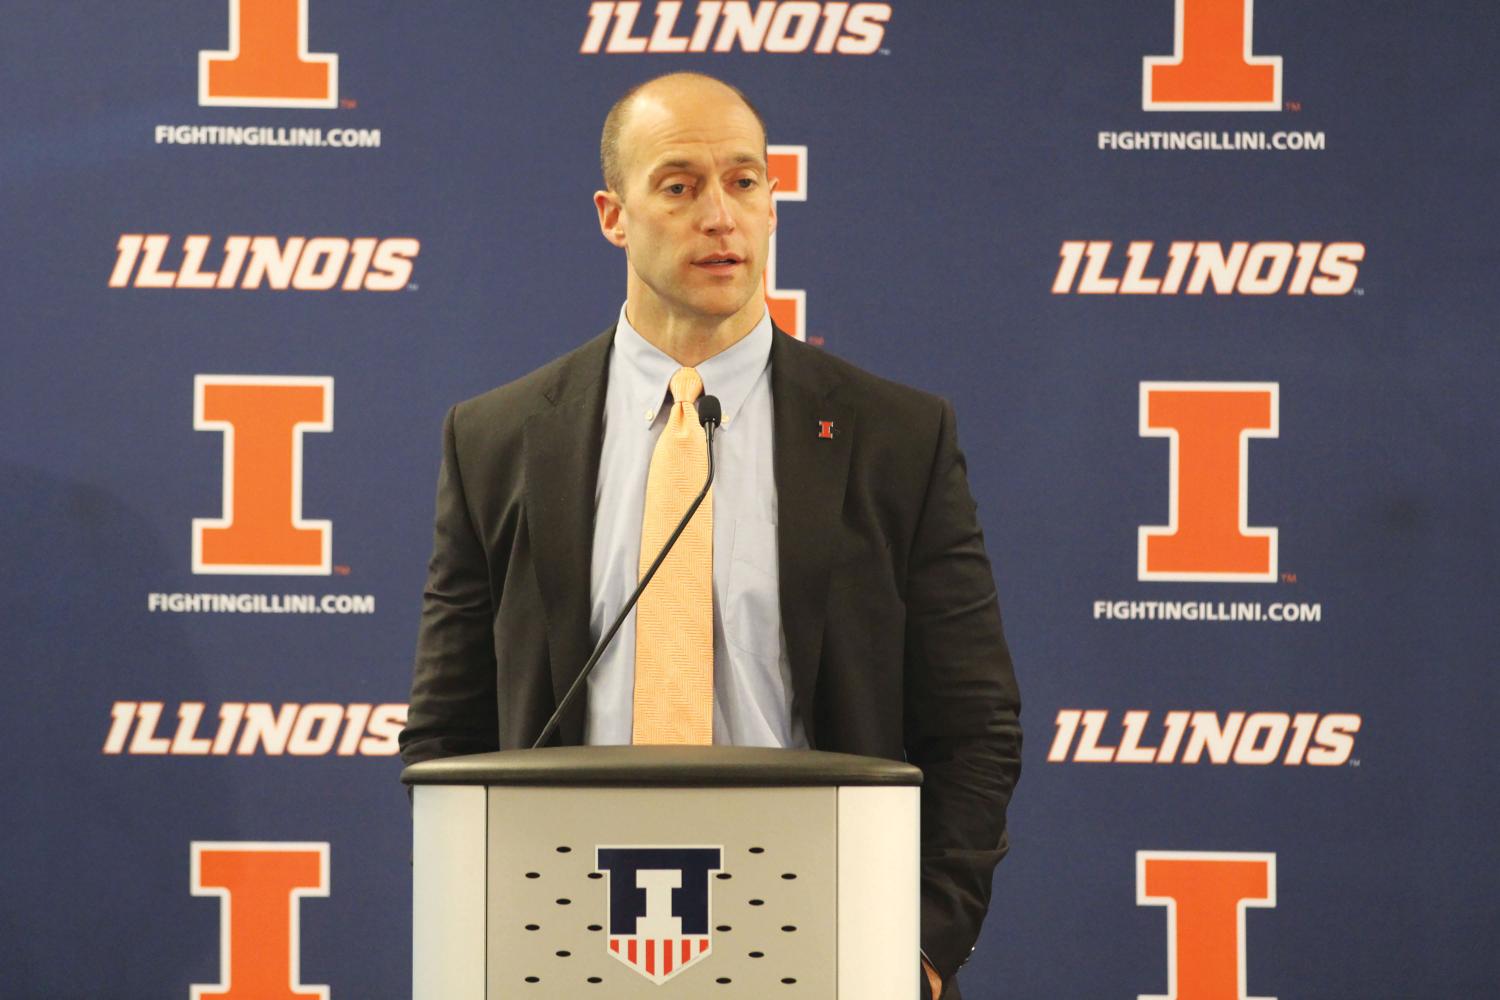 Both+head+coaches+Lovie+Smith+and+Whitman+hope+that+improved+facilities+will+help+the+Illini+move+forward+in+training+and+recruitment.+